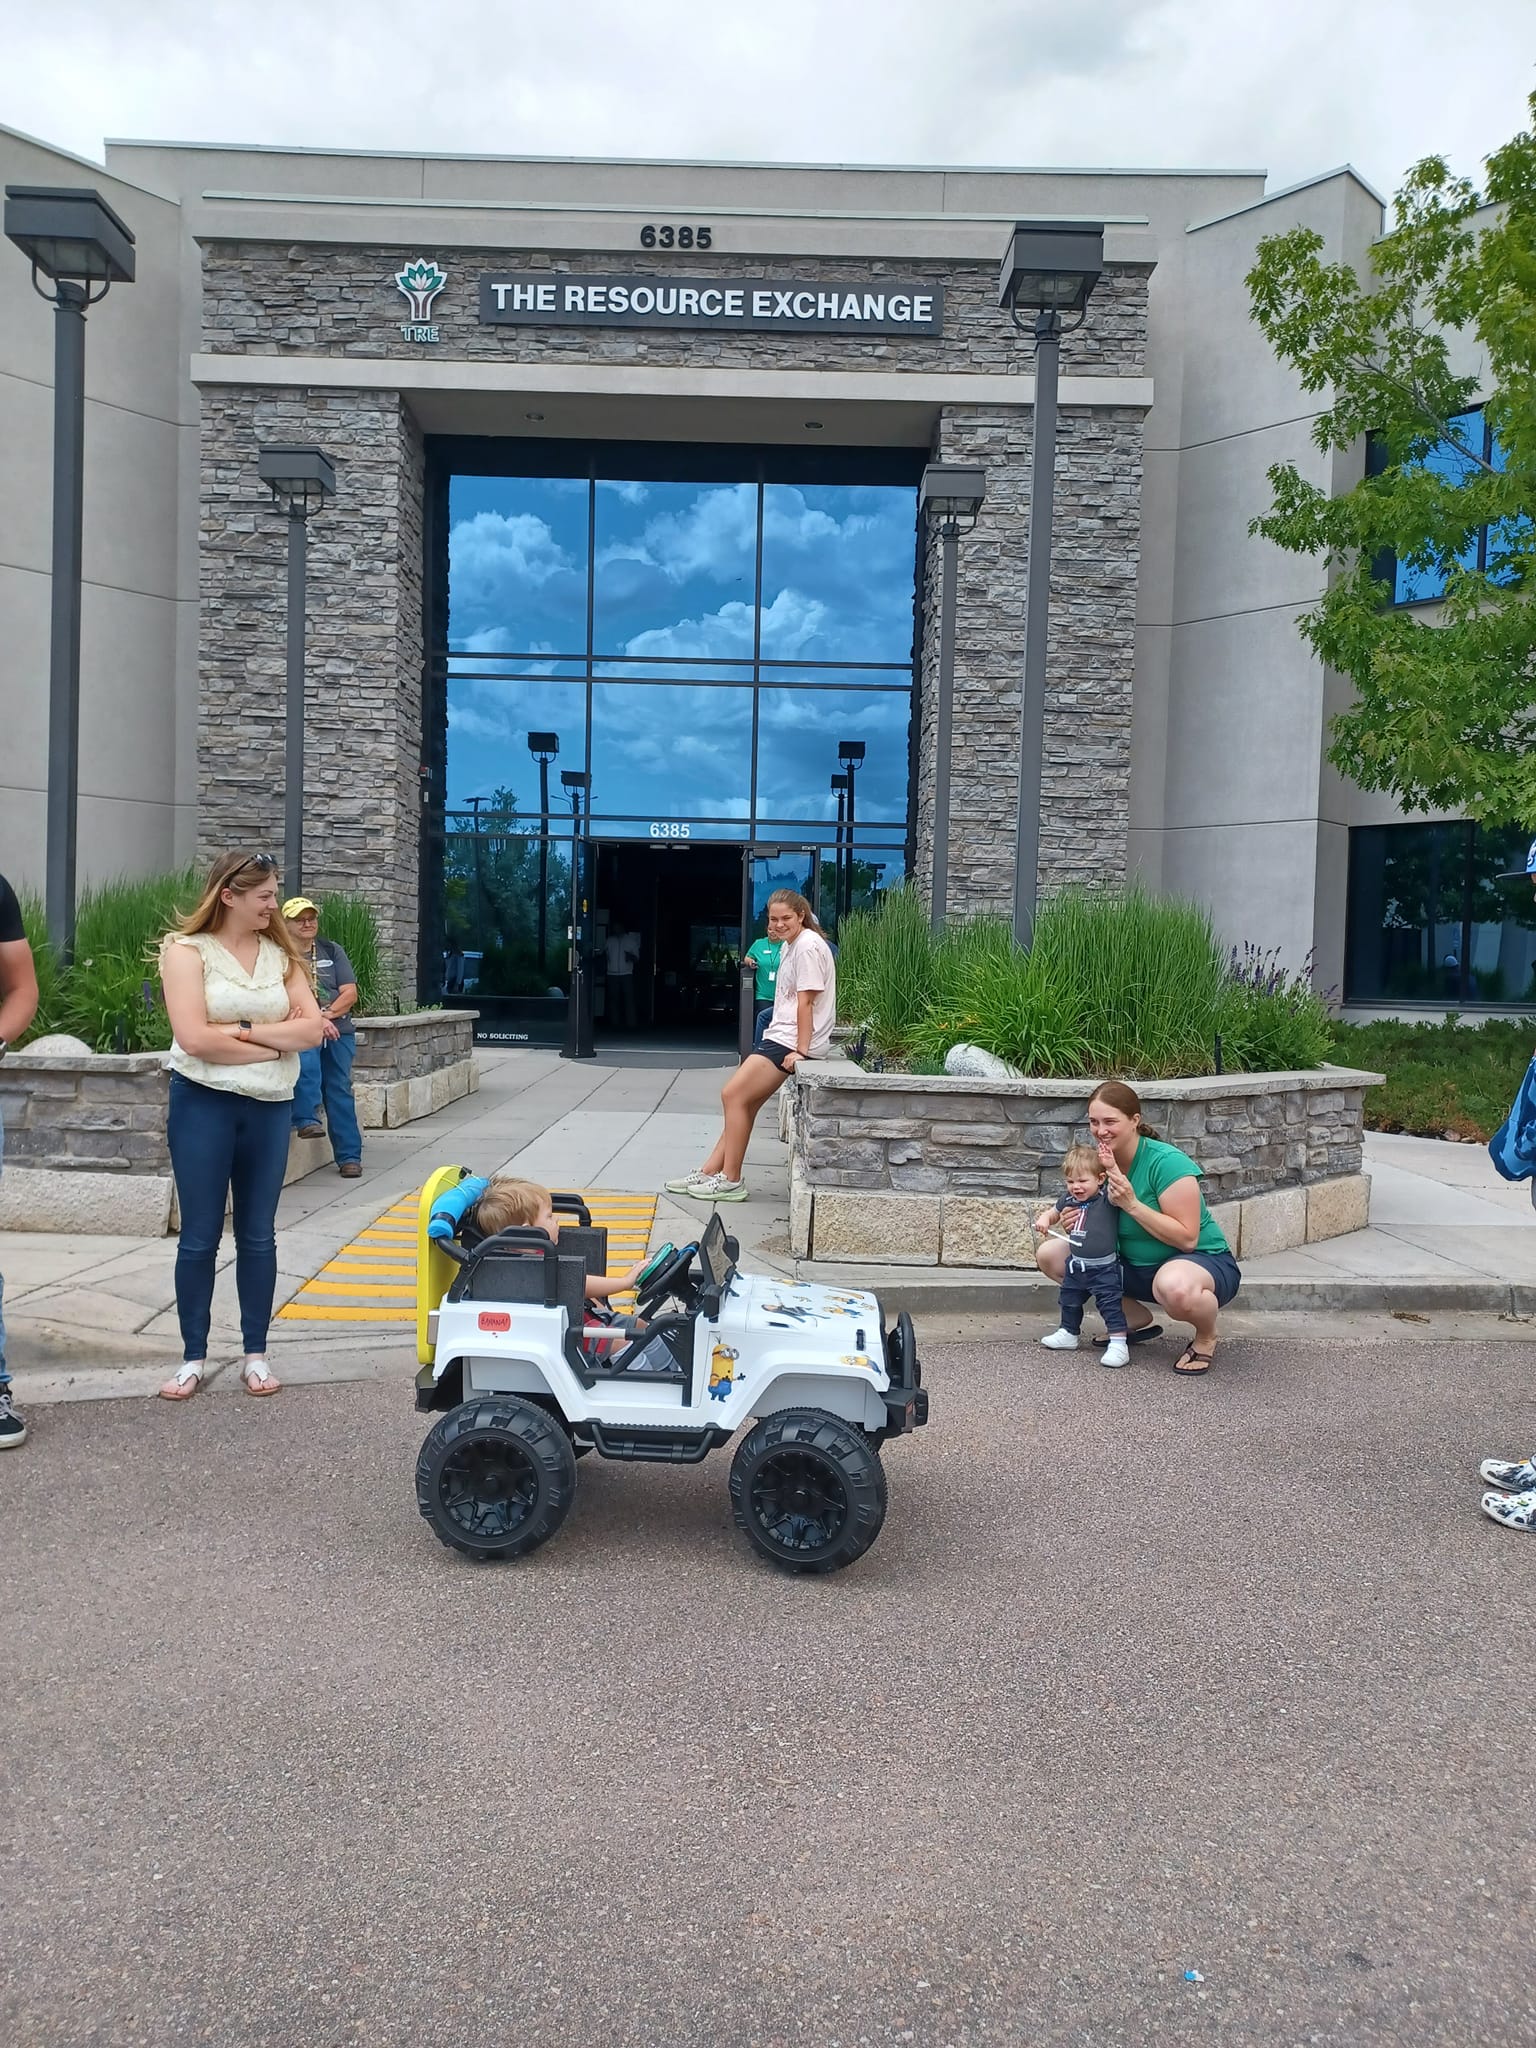 toddler rides a miniature jeep in front of The Resource Exchange building